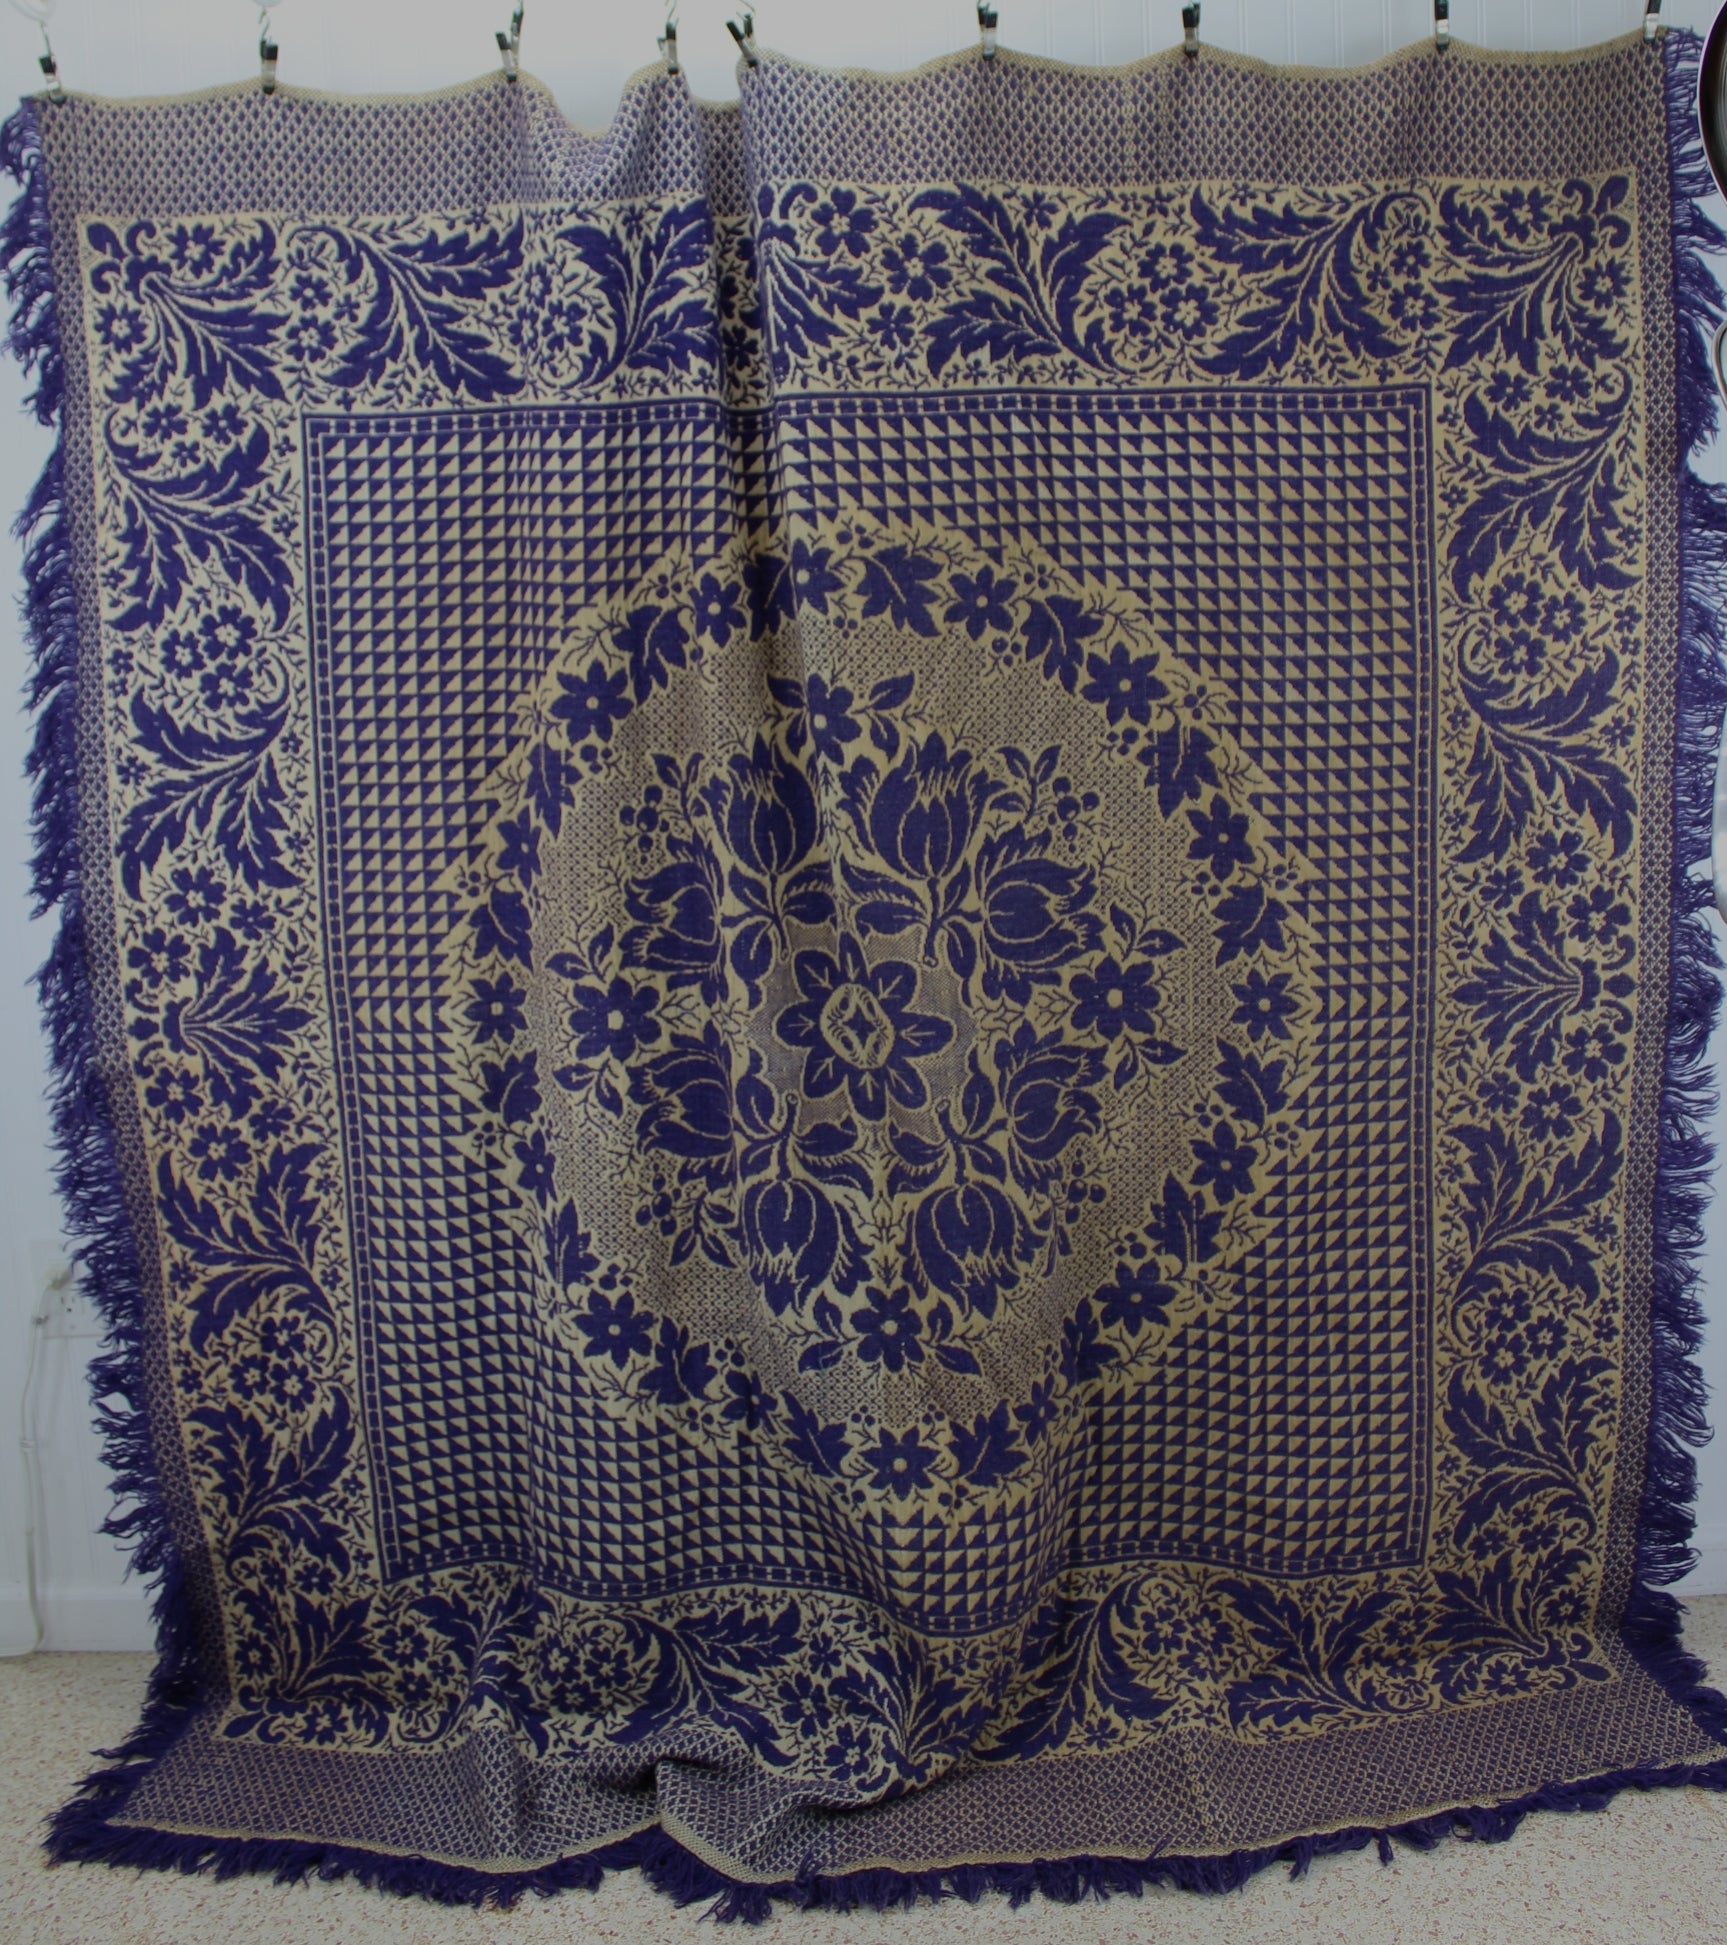 Antique Jacquard Coverlet - Indigo Purple Floral Medallion Geometric - Initials A E - Intricate All Over Design old coverlet